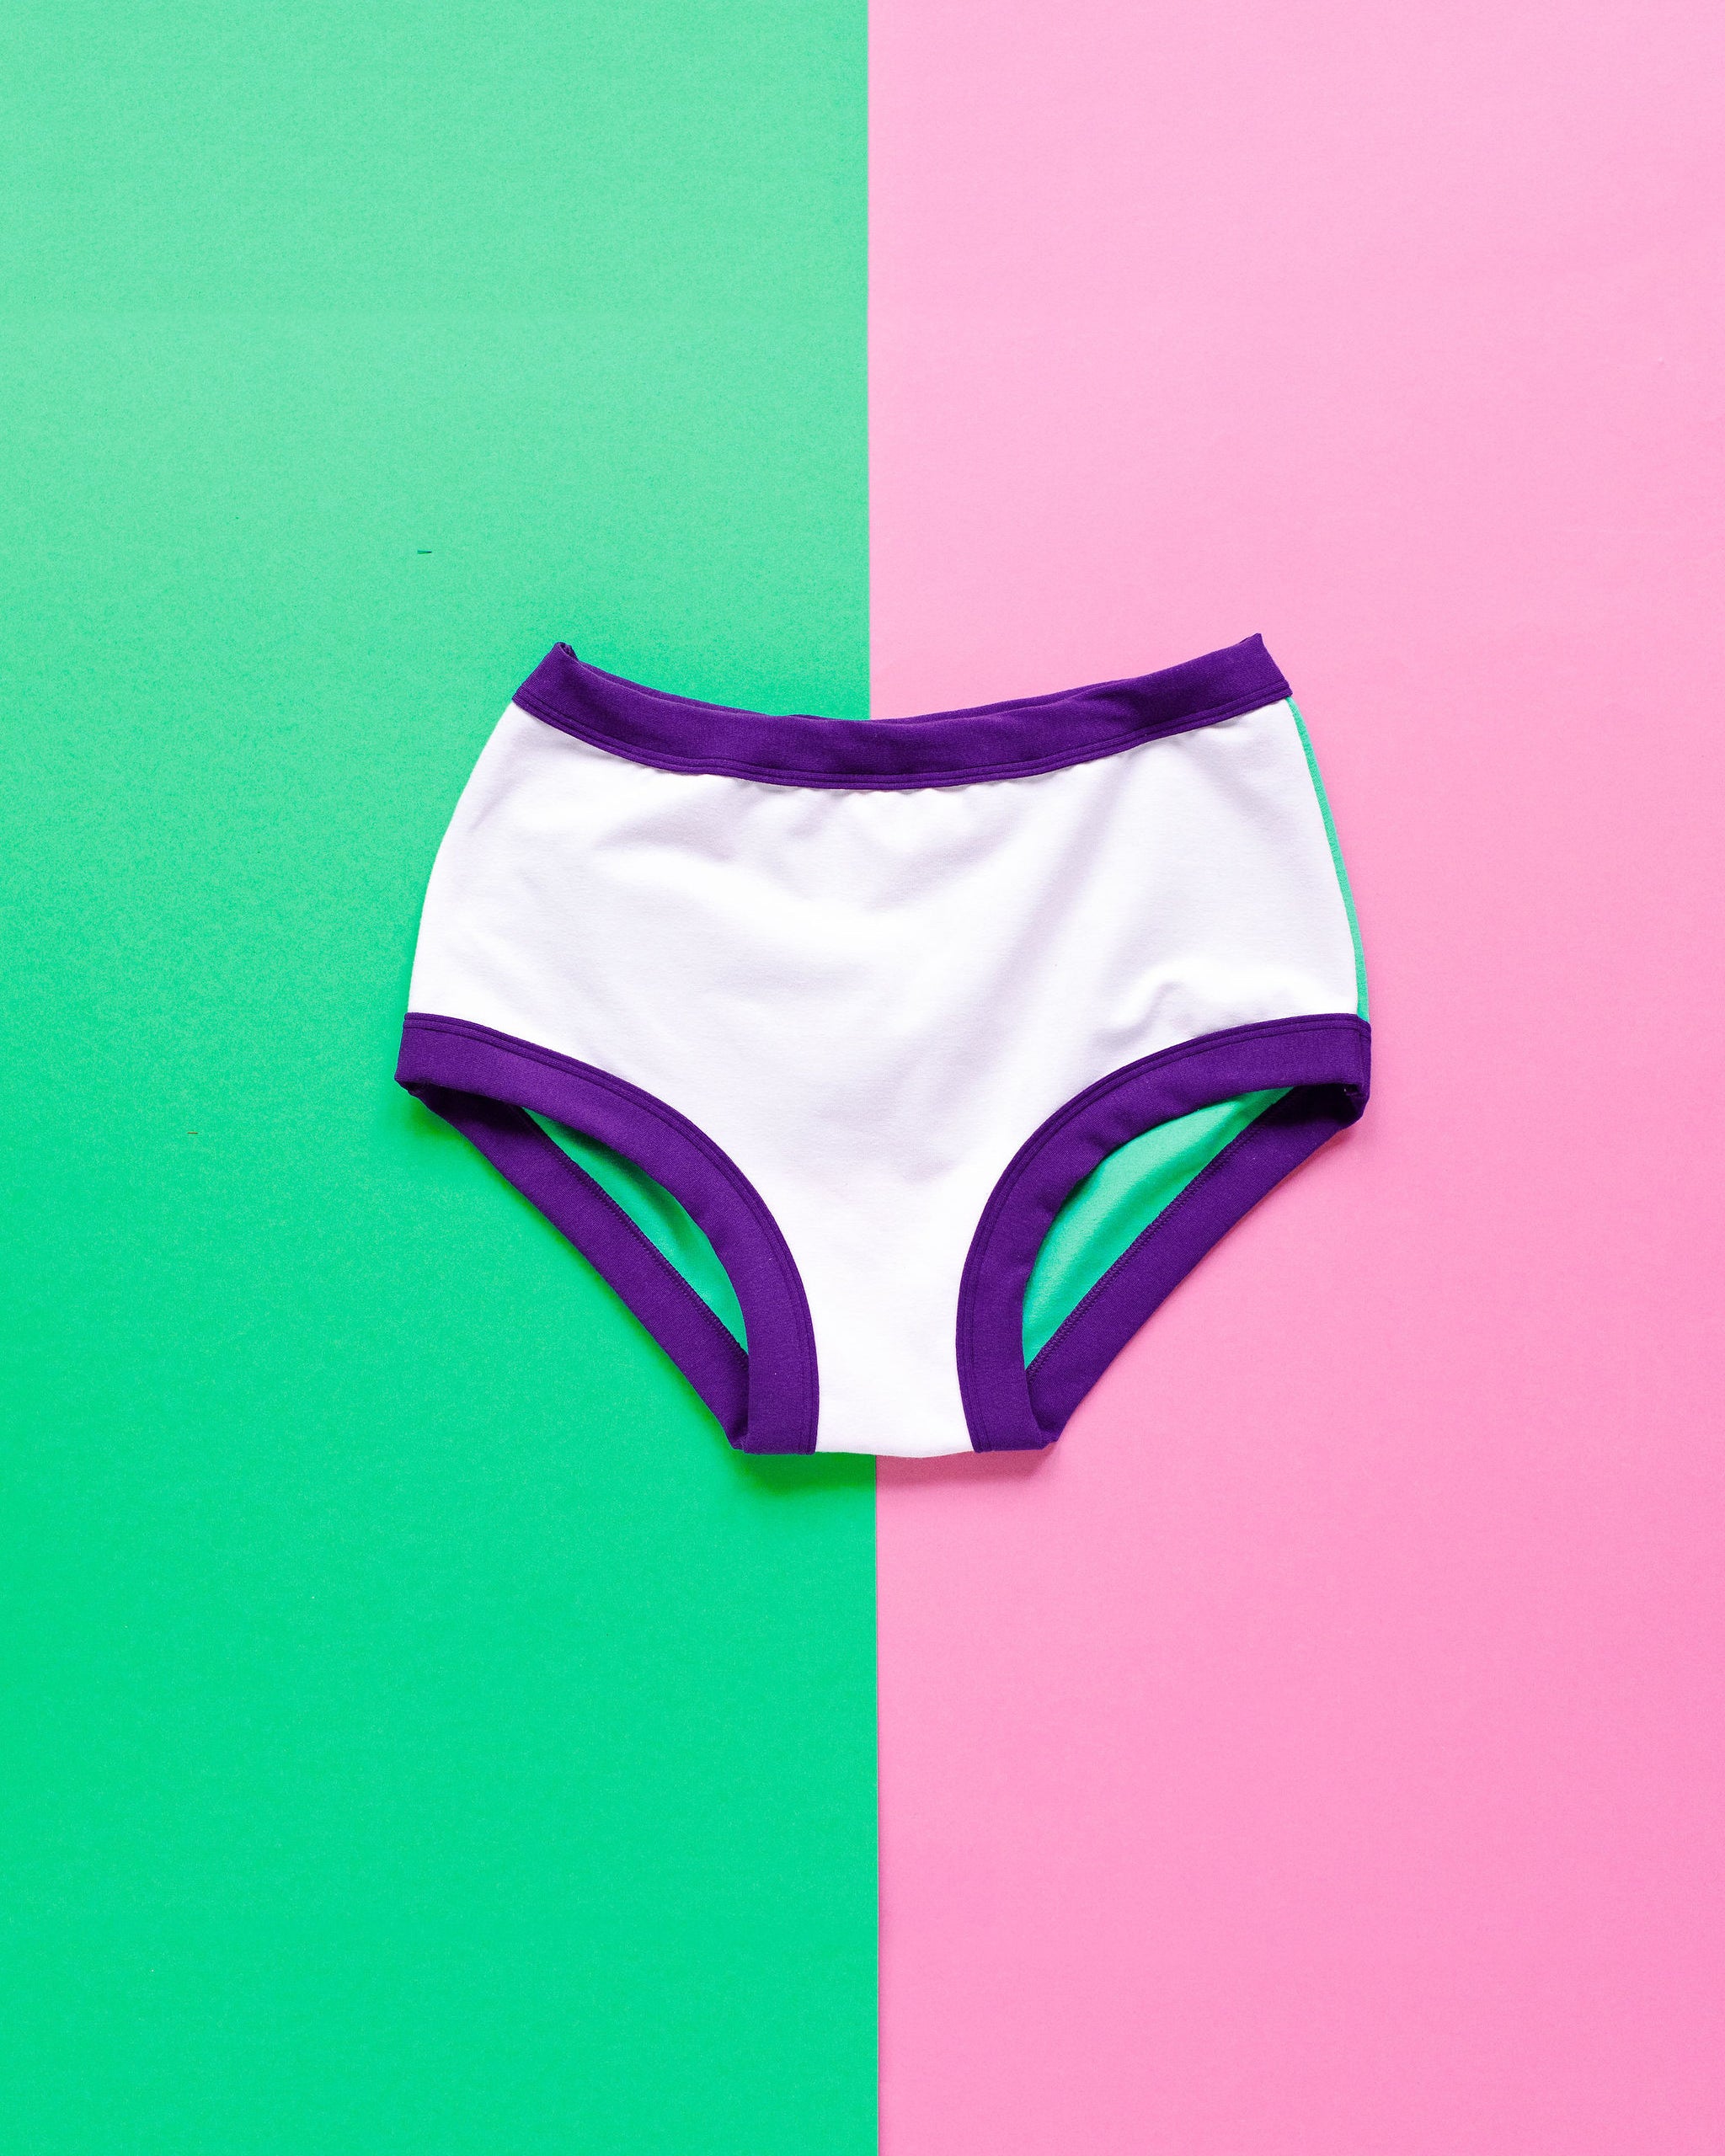 Flat lay of Thunderpants Original style underwear in Mix 'n Match - combination of different colors.